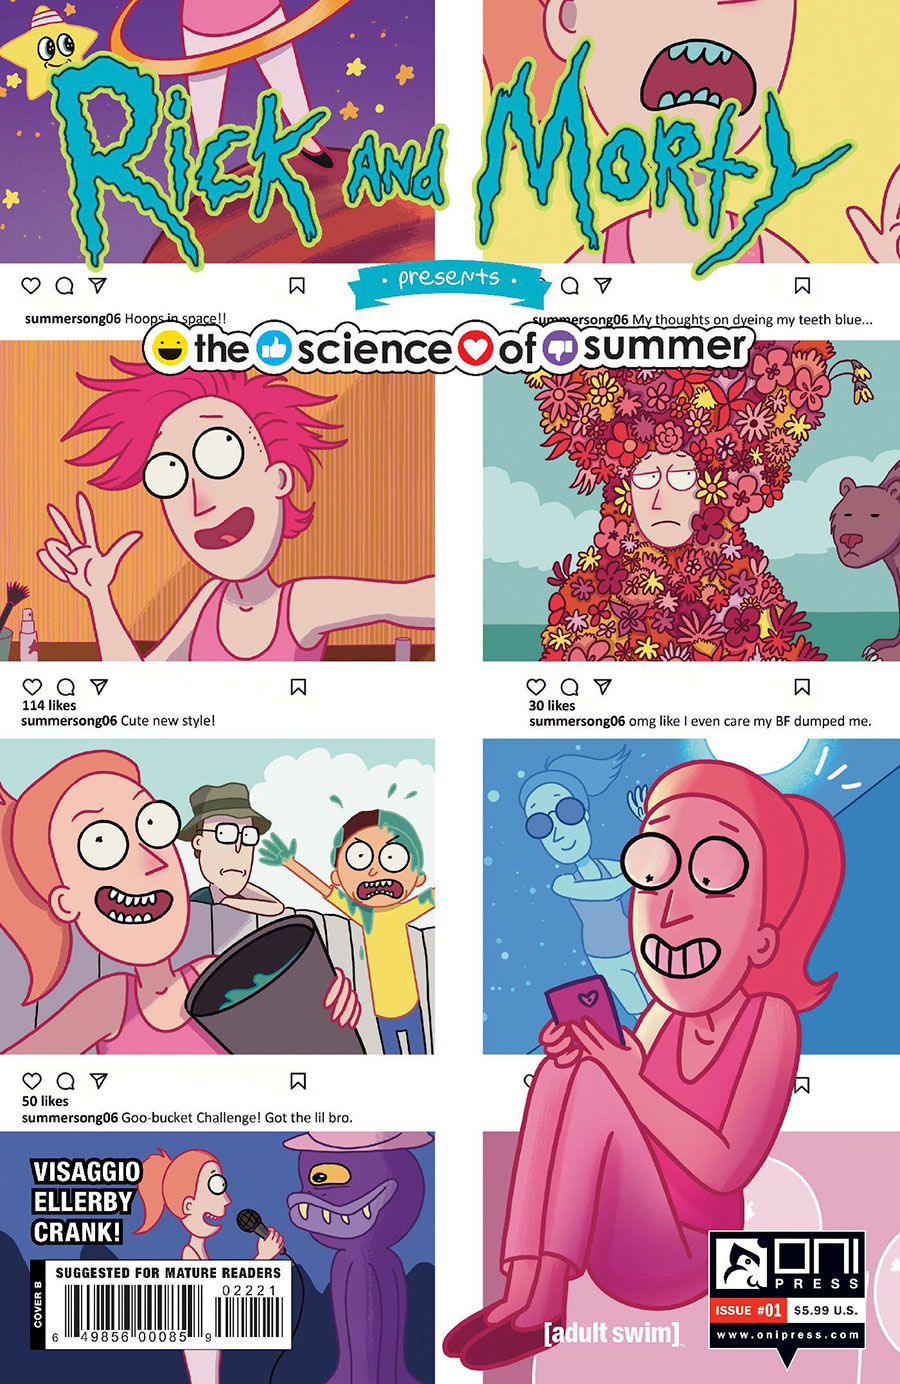 Rick And Morty Presents Science Of Summer #1 (One Shot) Cover B Variant Gina Allnatt Cover